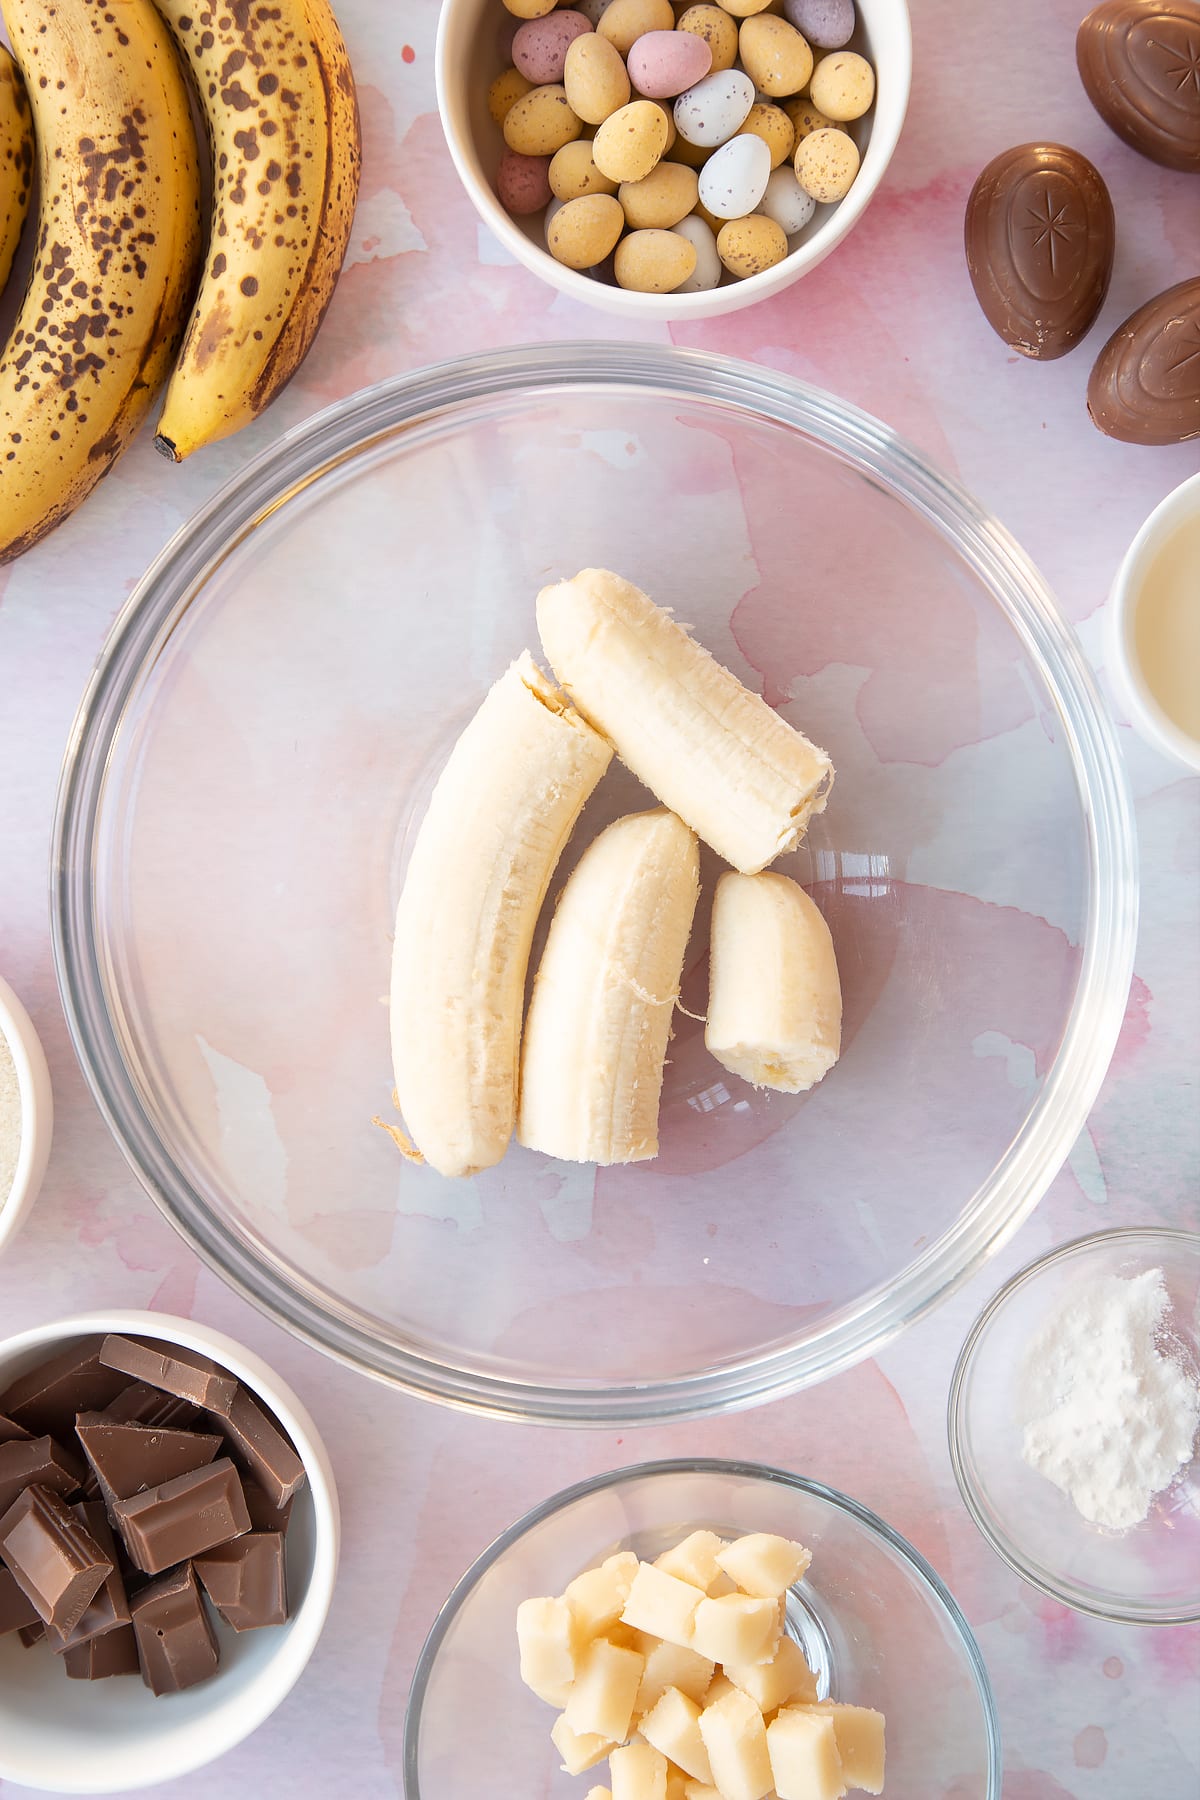 Bananas in a mixing bowl. Ingredients to make Easter banana bread surround the bowl.